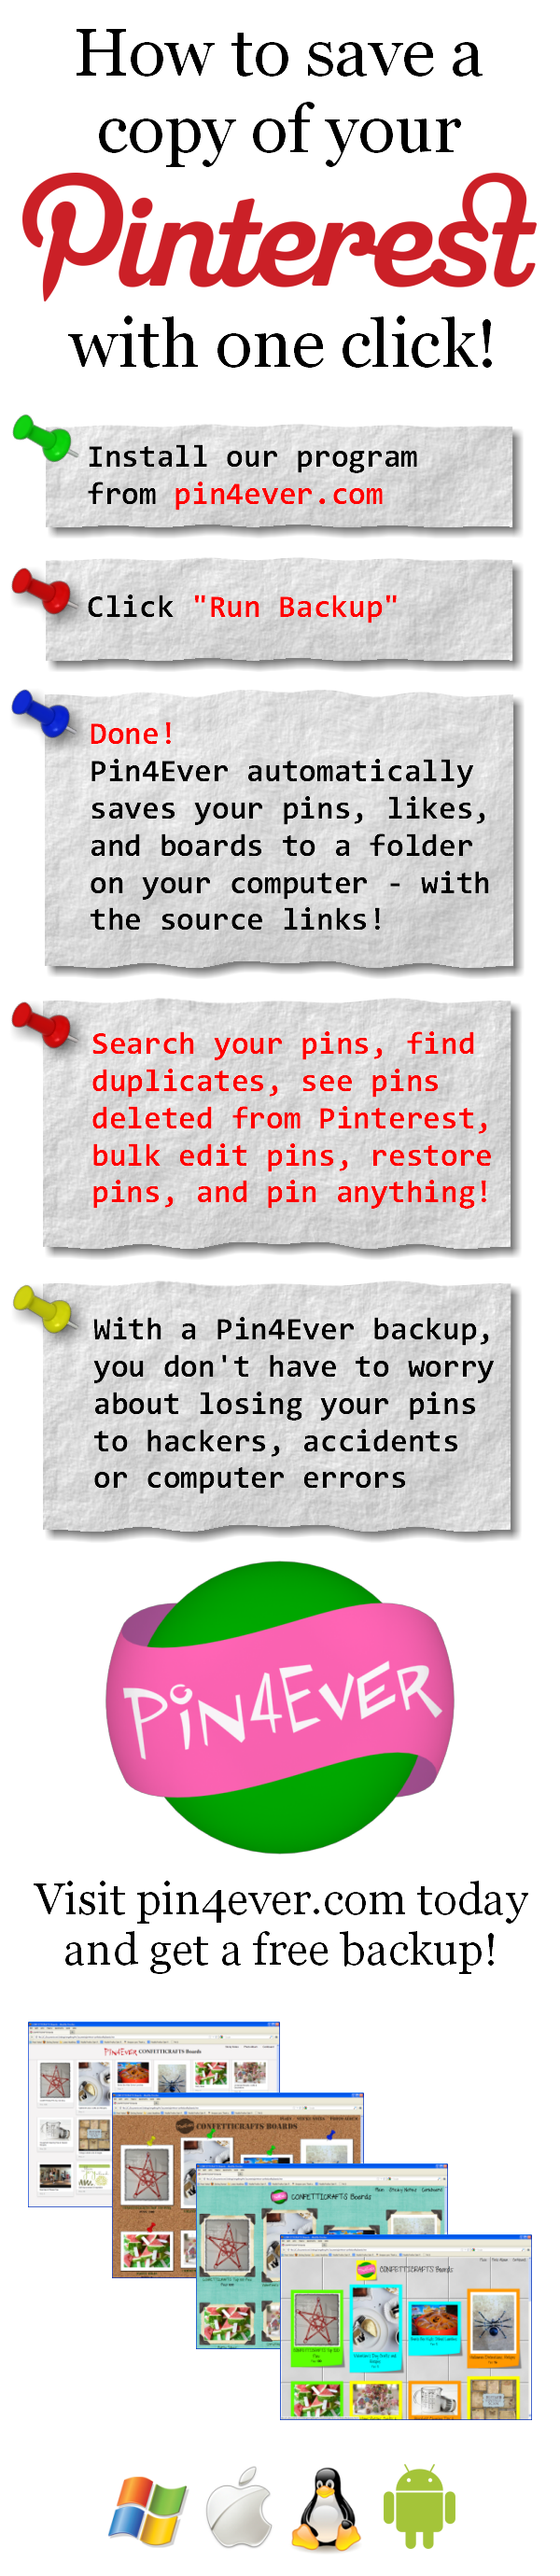 Are your pins protected? Pin4Ever has saved, edited or uploaded 476,664,825 pins since September 2012. Go to pin4ever.com and try it free!